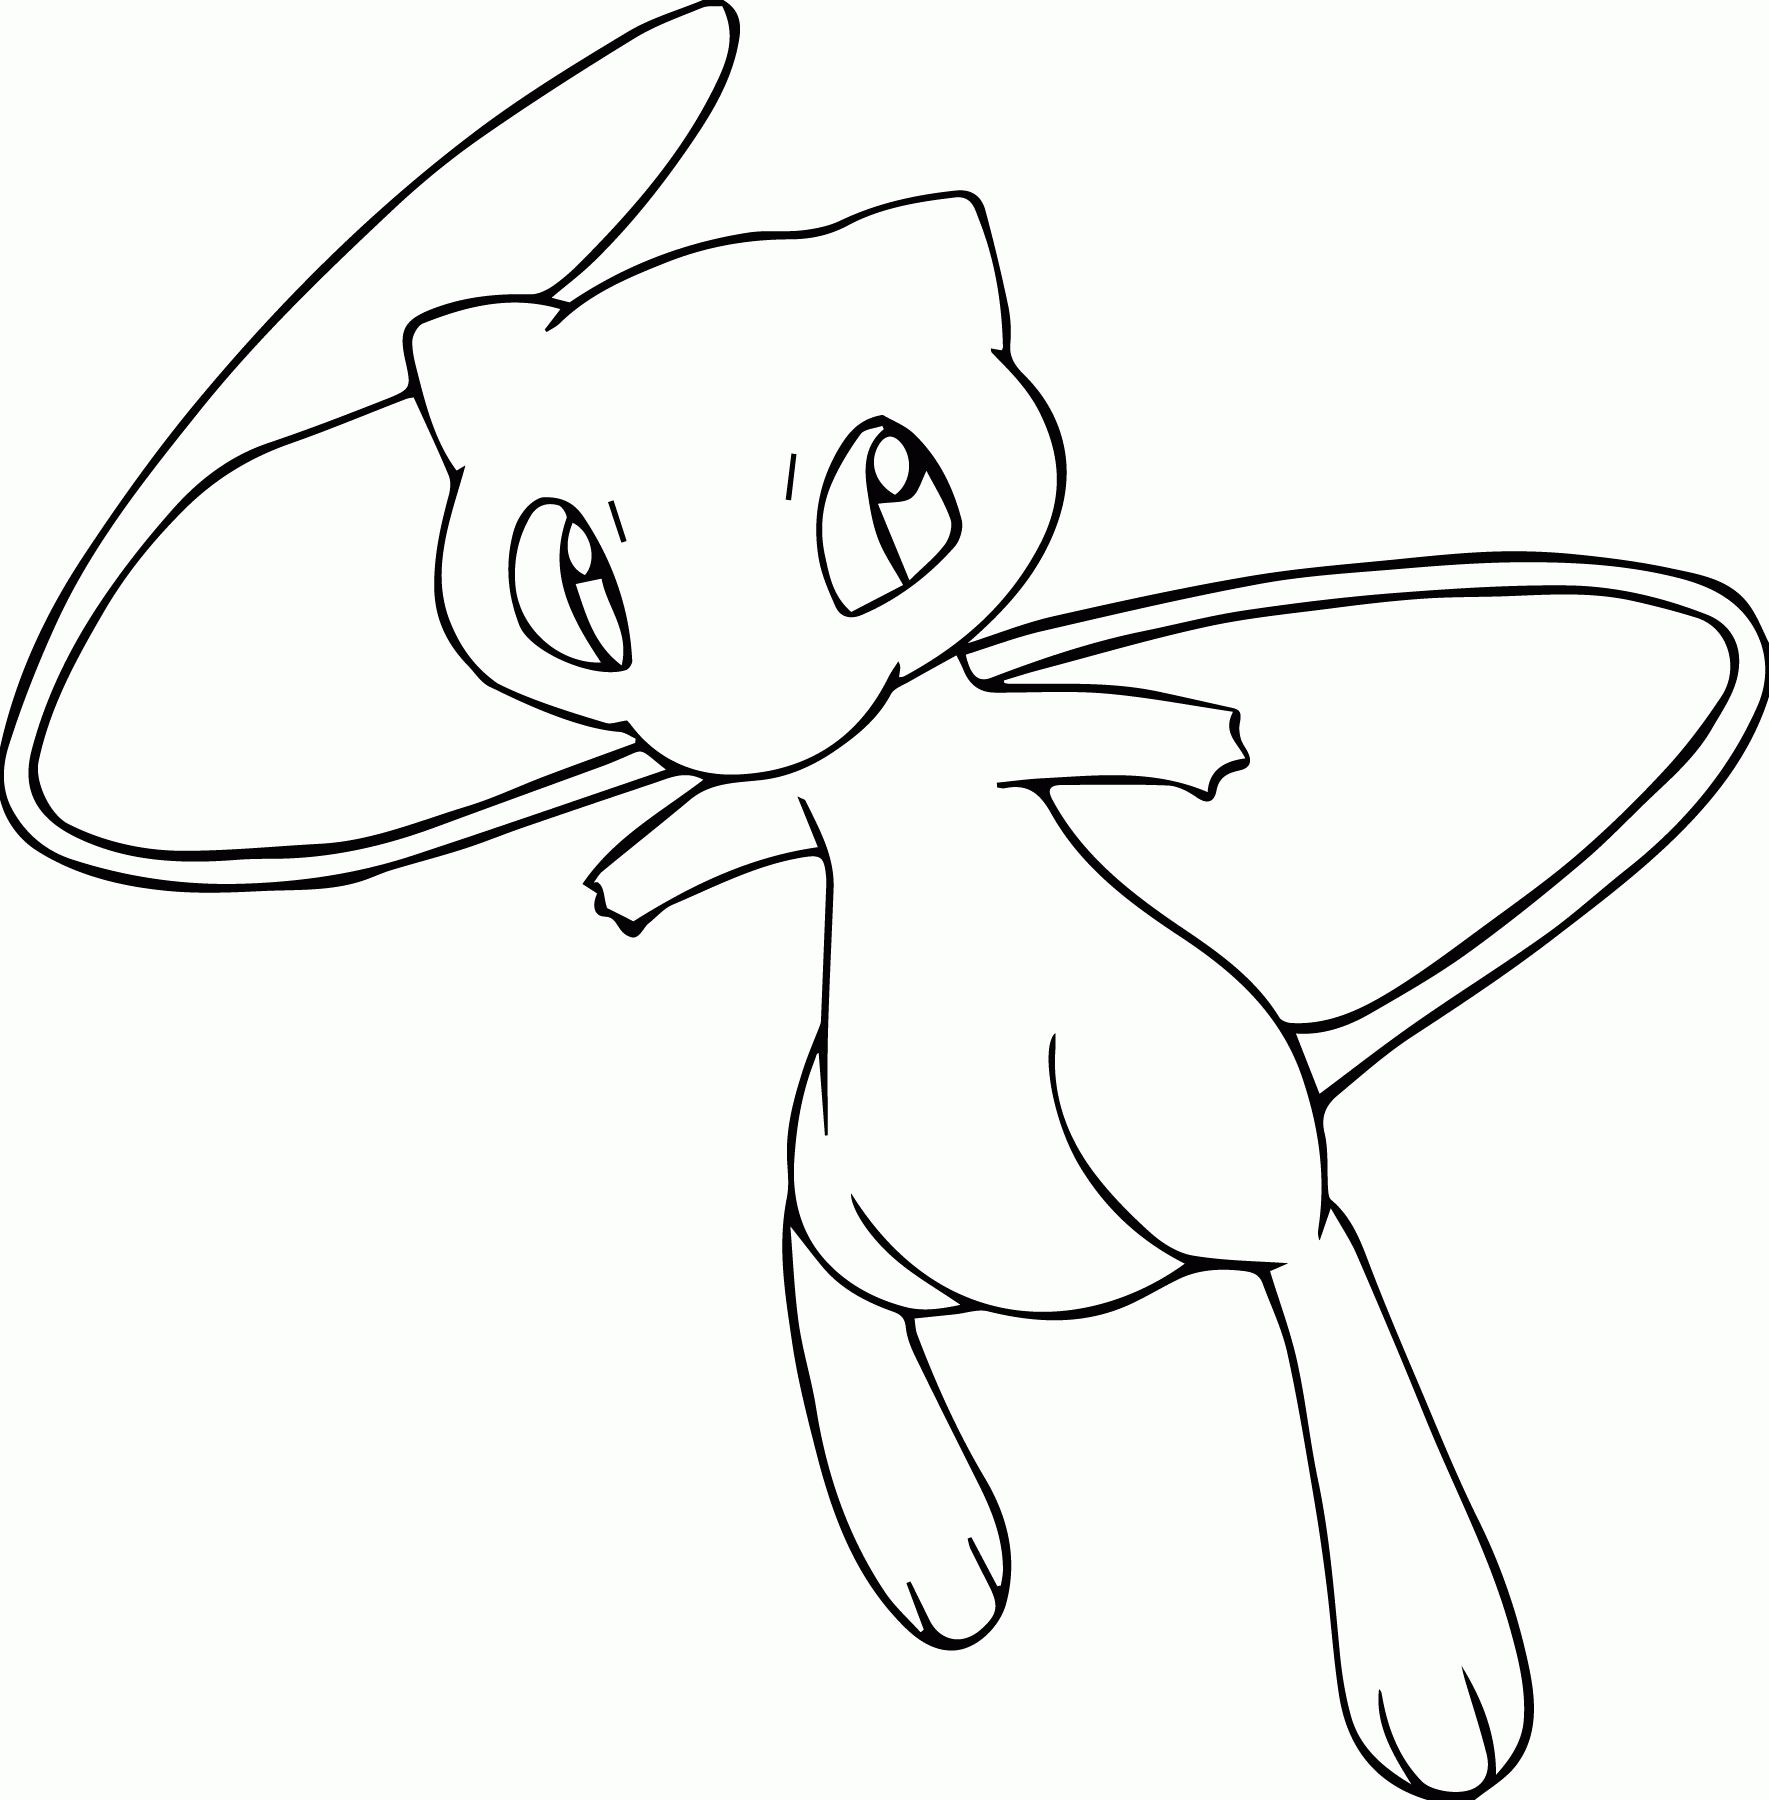 Pokemon Mew Coloring Page   Coloring Home